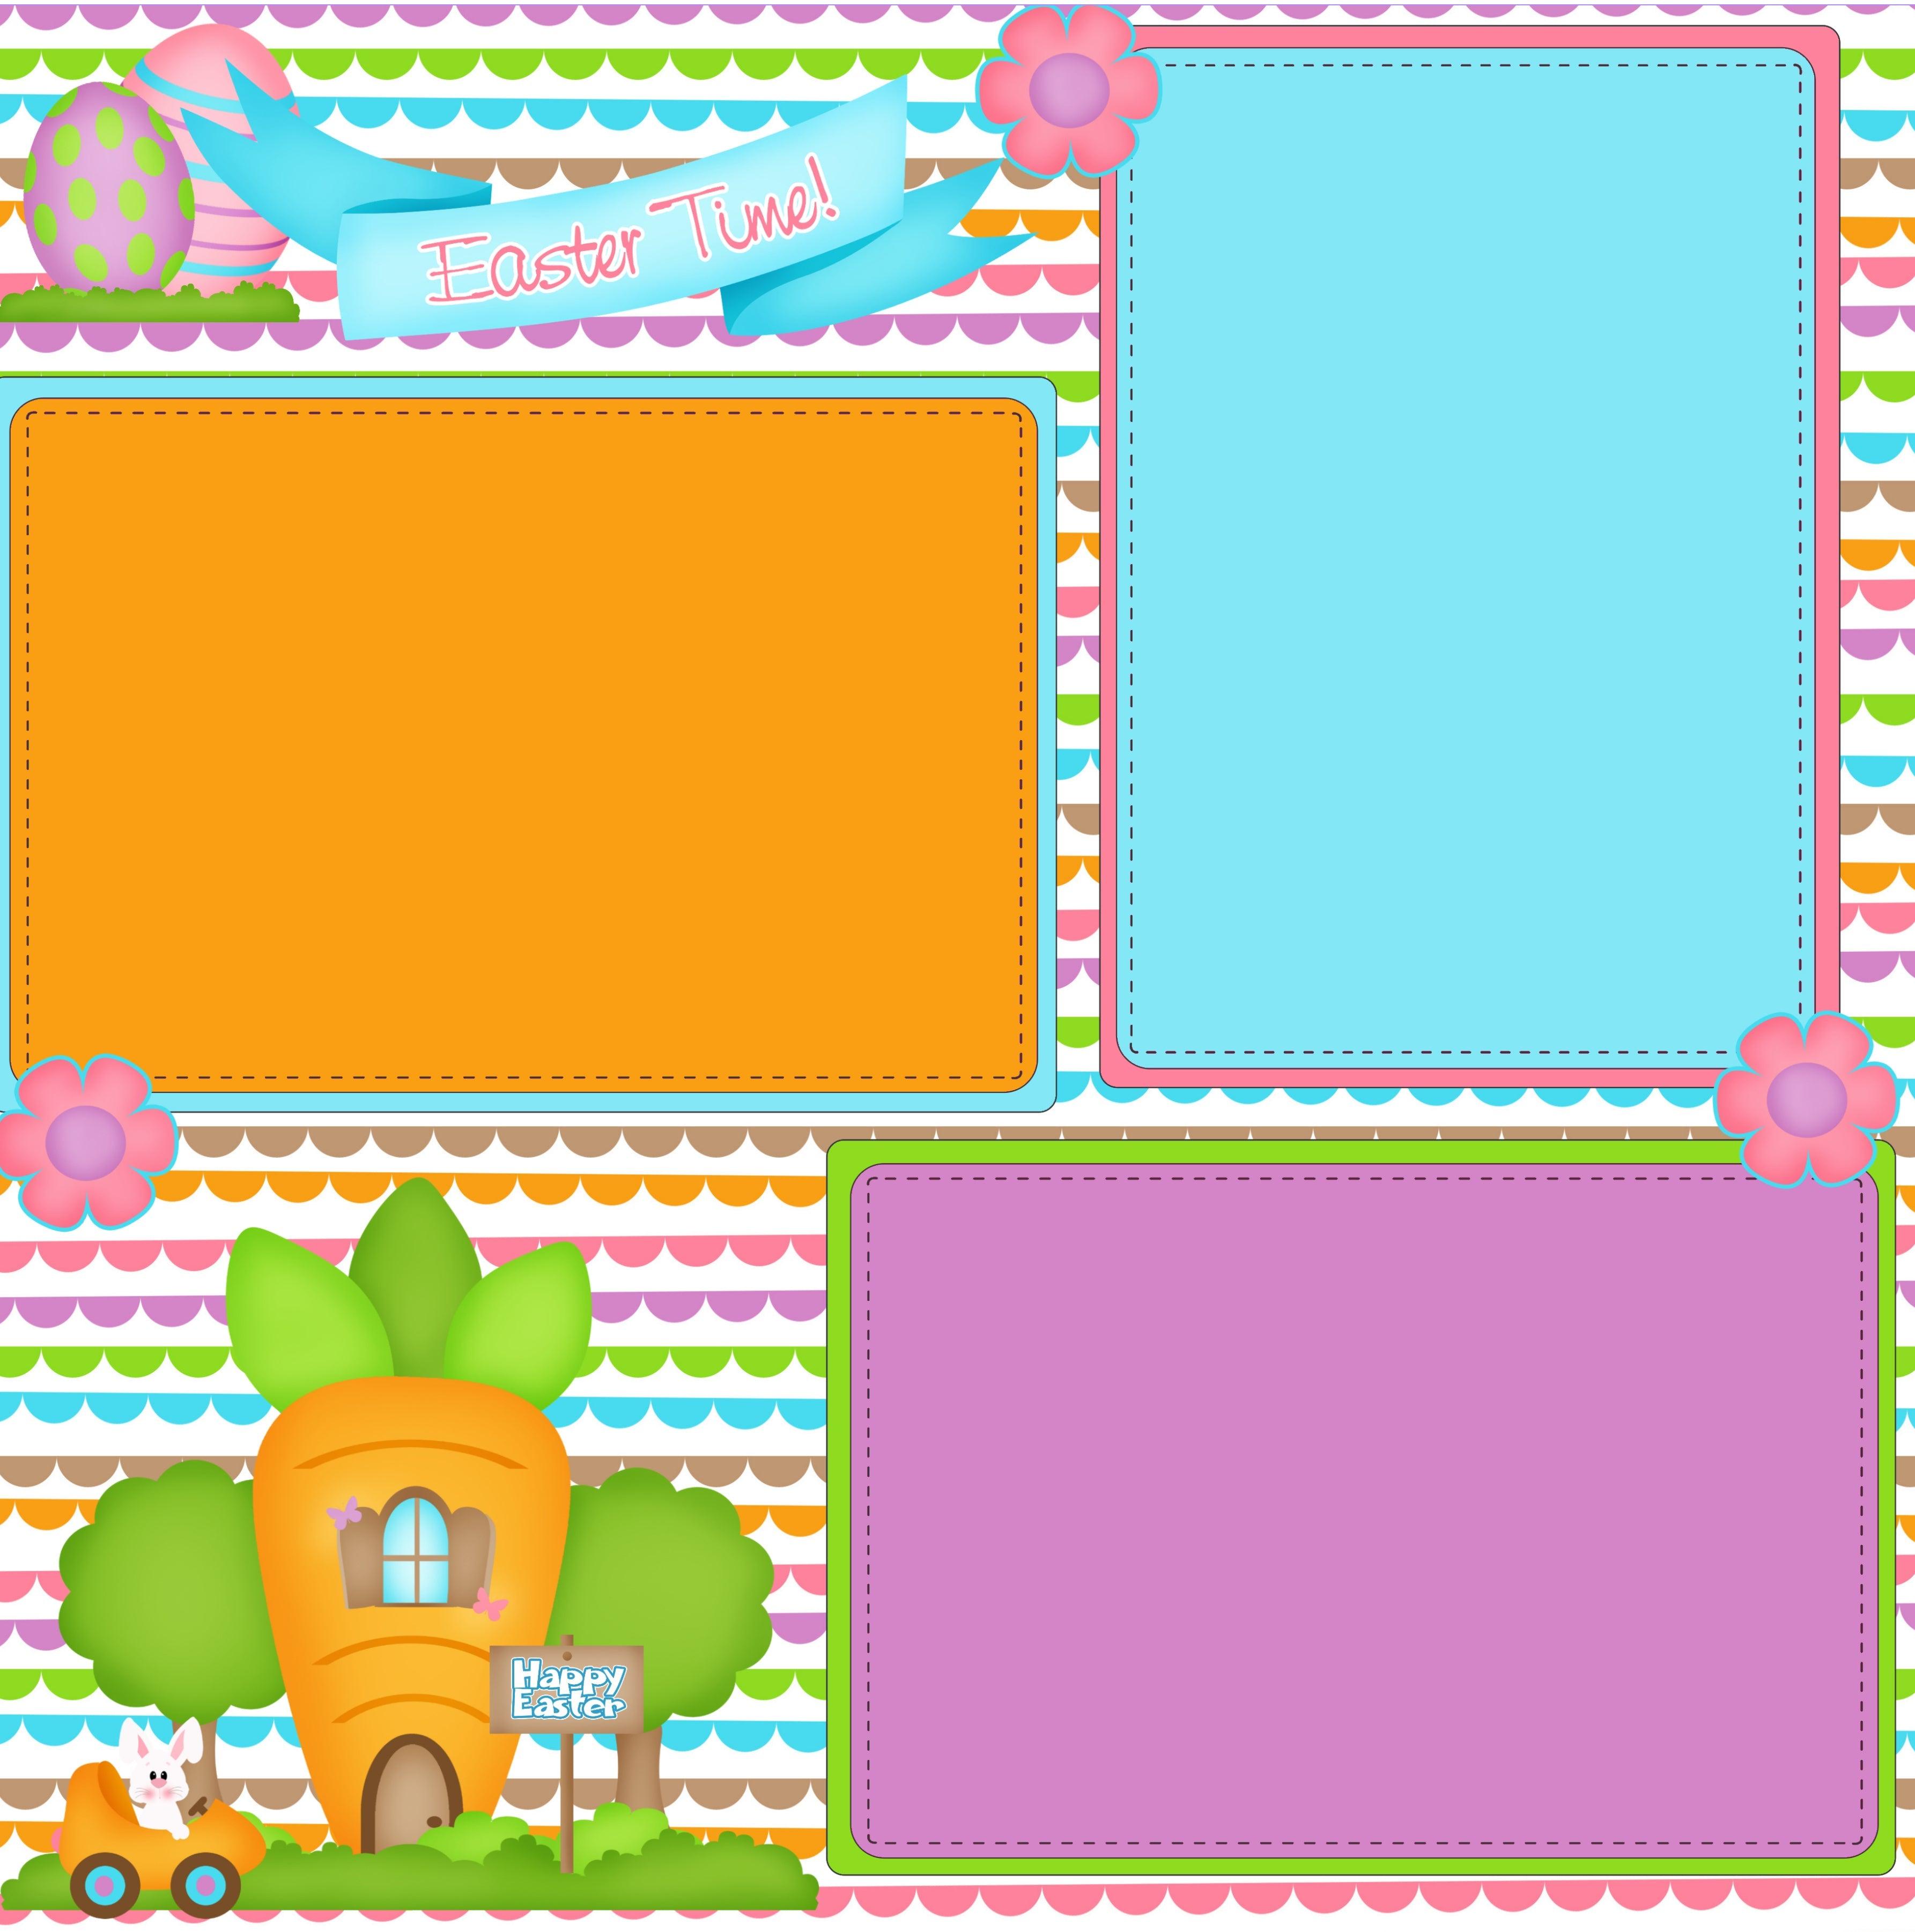 Easter Time Collection Happy Easter (2) - 12 x 12 Premade, Printed Scrapbook Pages by SSC Designs - Scrapbook Supply Companies